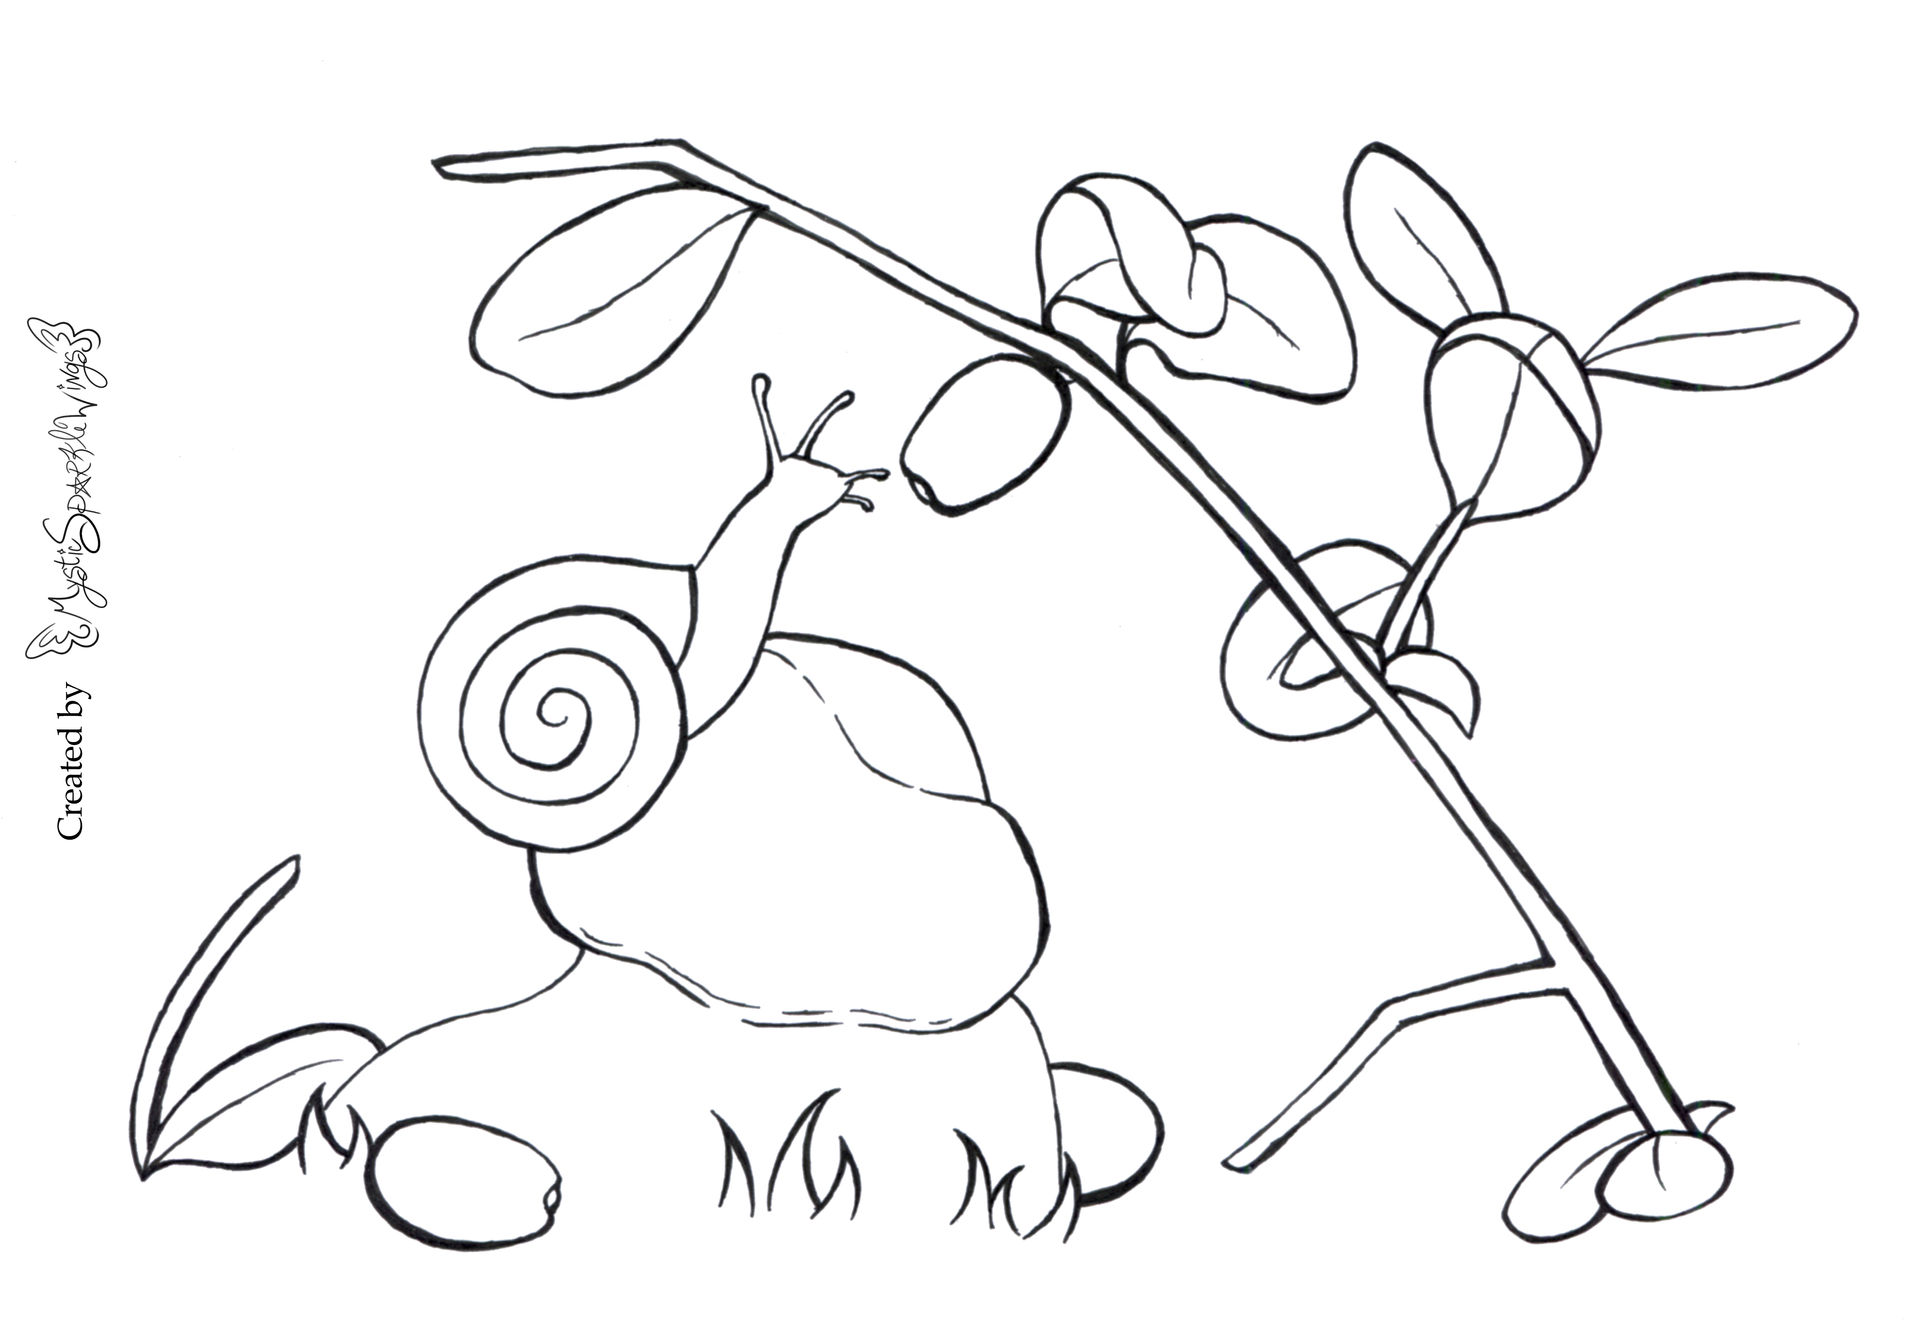 Sweet snail coloring page by mysticsparklewings on